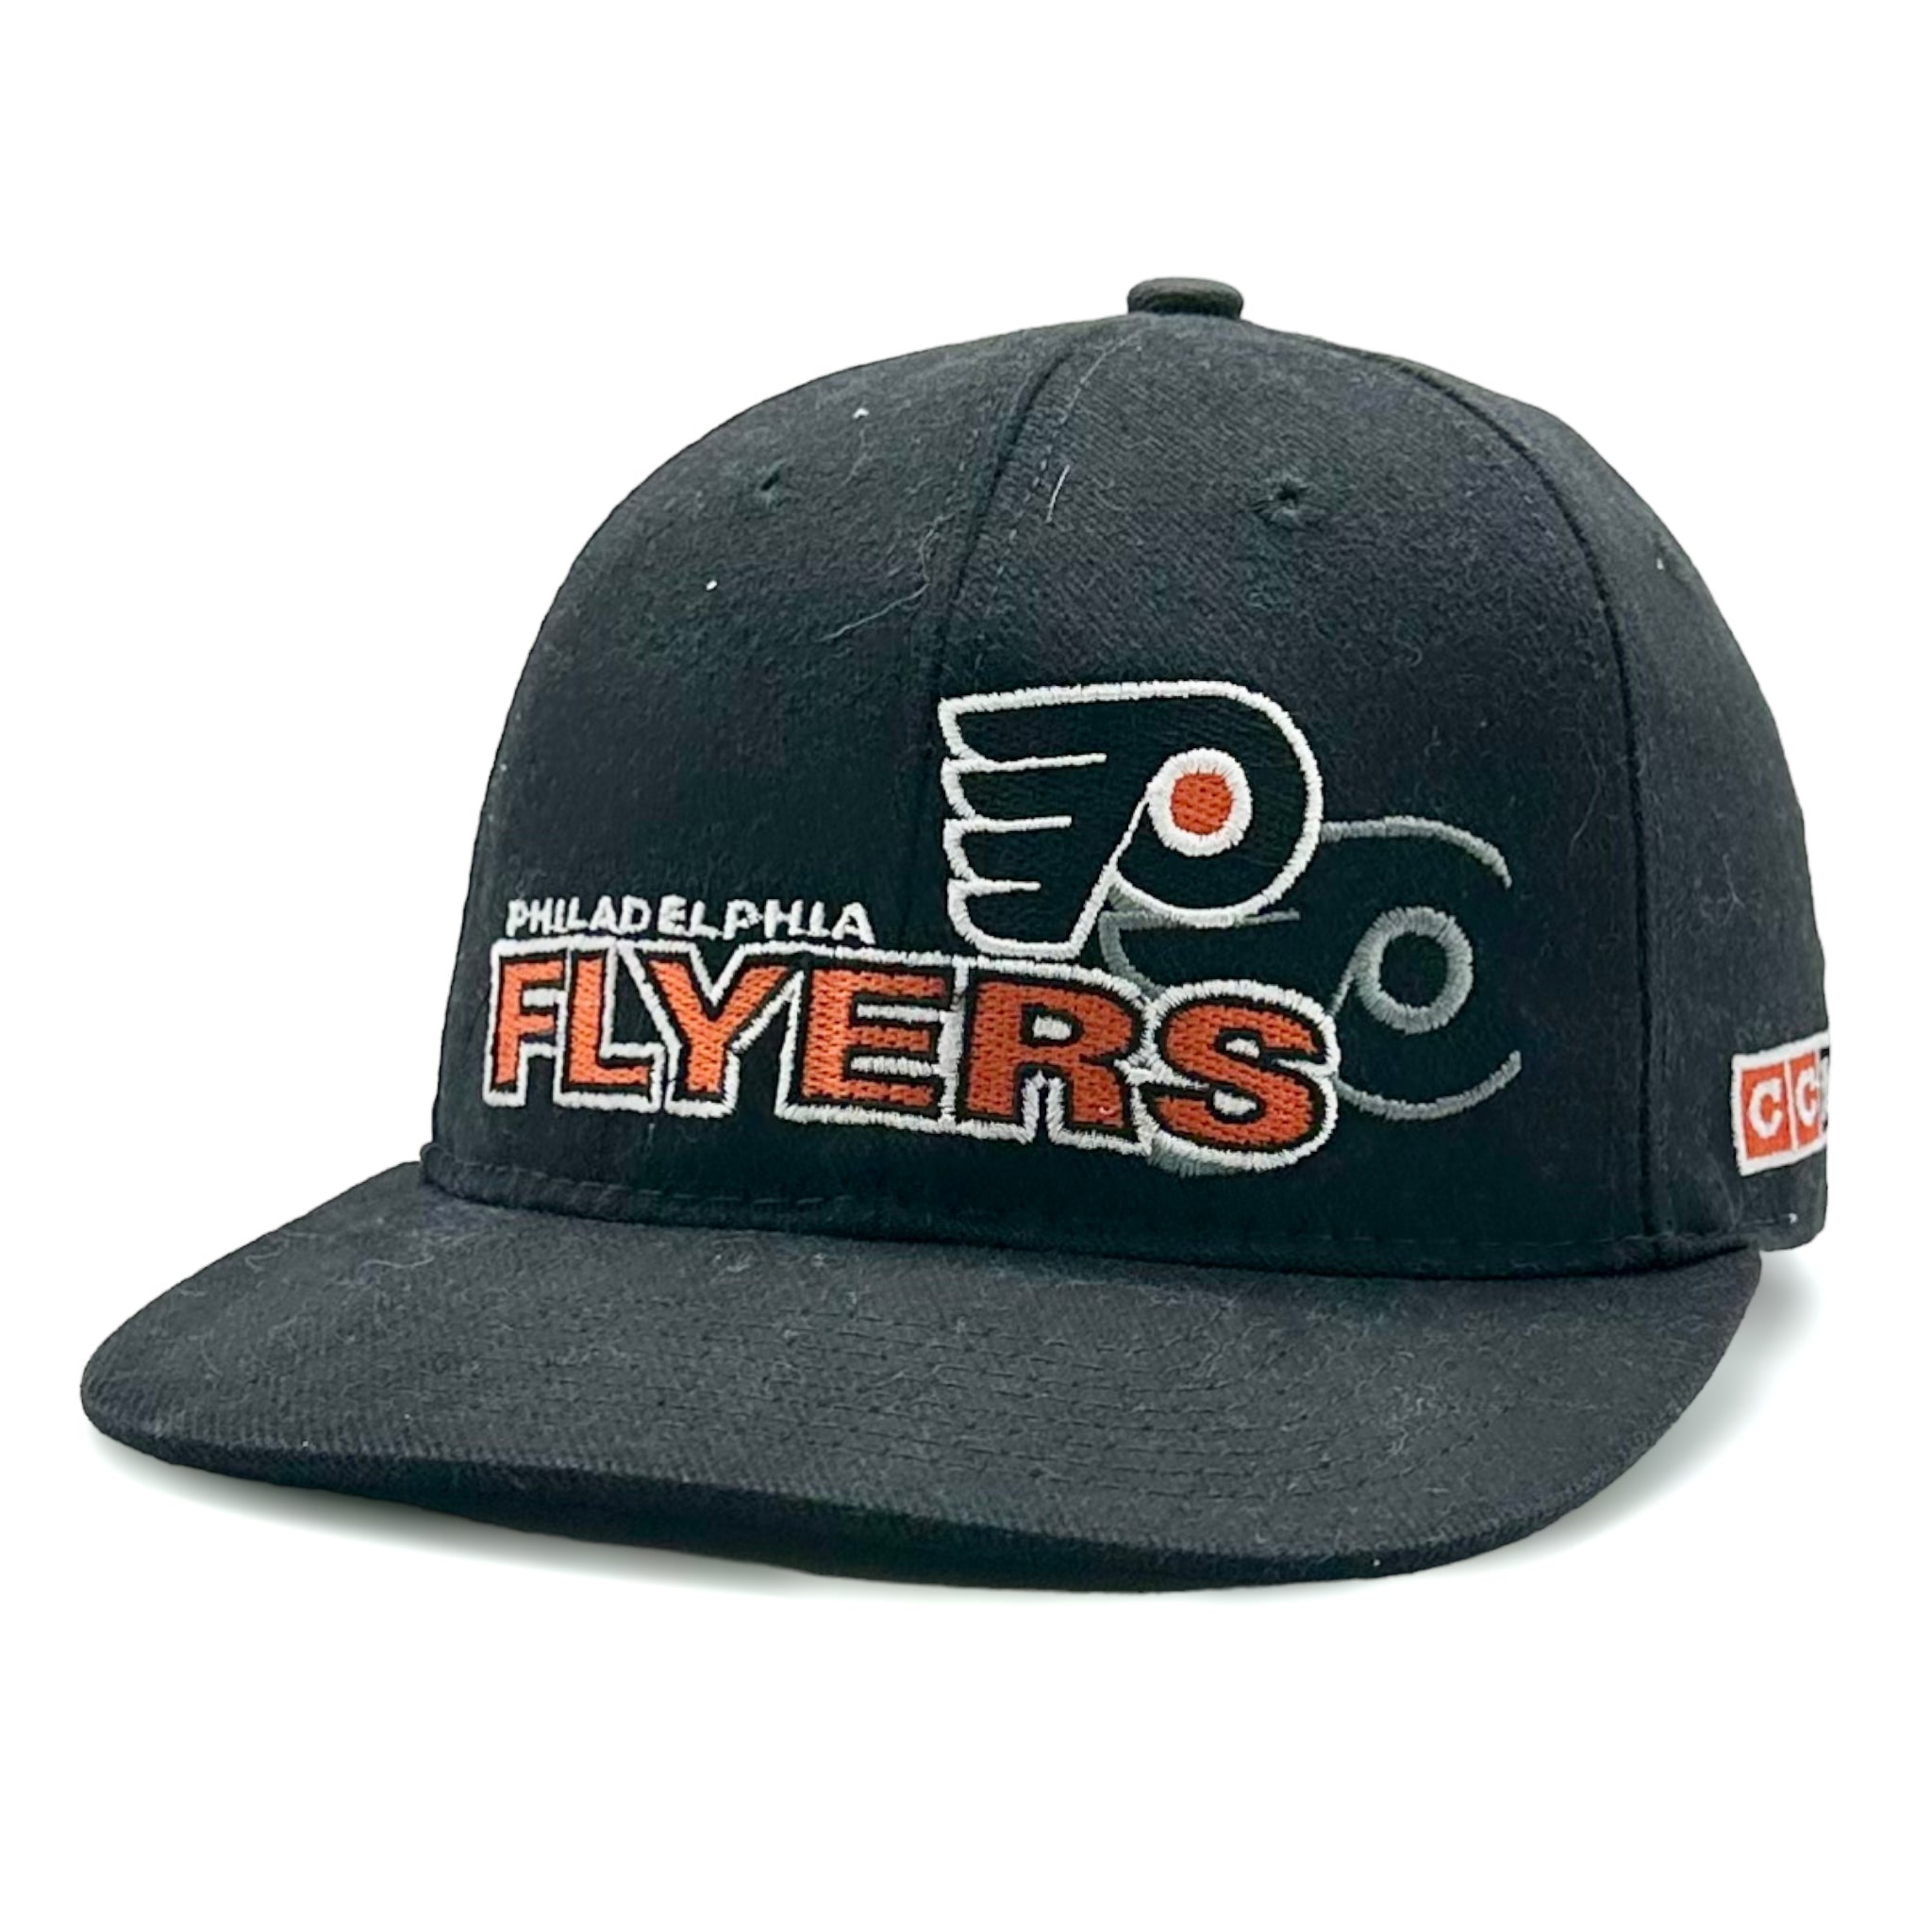 I'm a Vintage Snapback collector and just wanted to show off my flyers  collection! As a big flyers fan I try and get as many as I can. Very fun  hobby! 